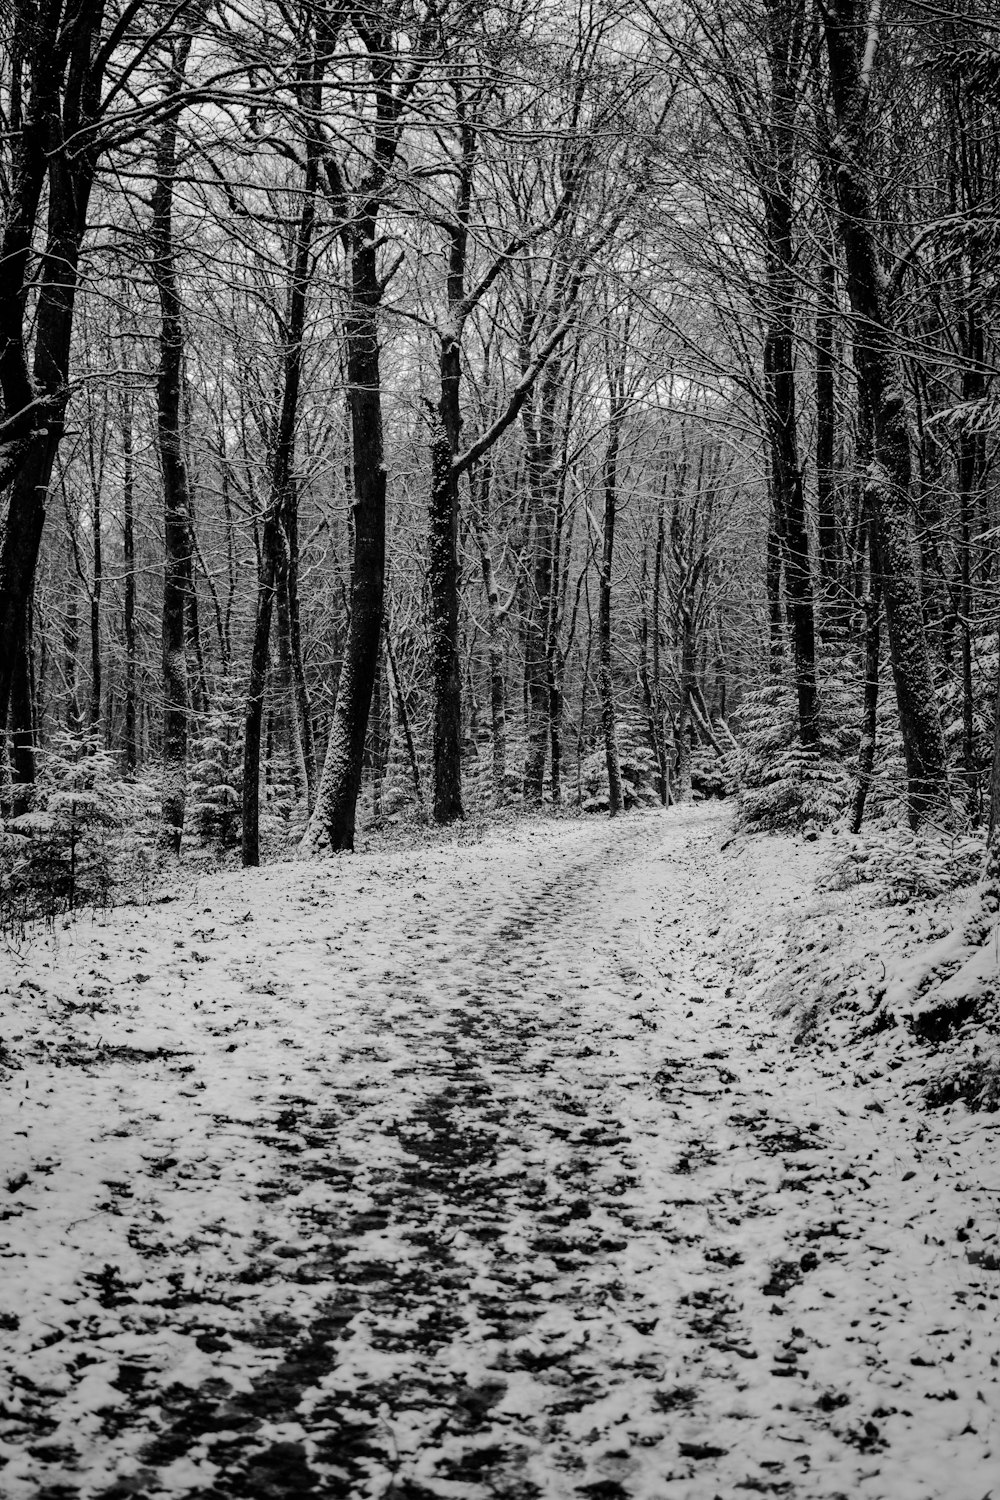 grayscale photo of trees and snow